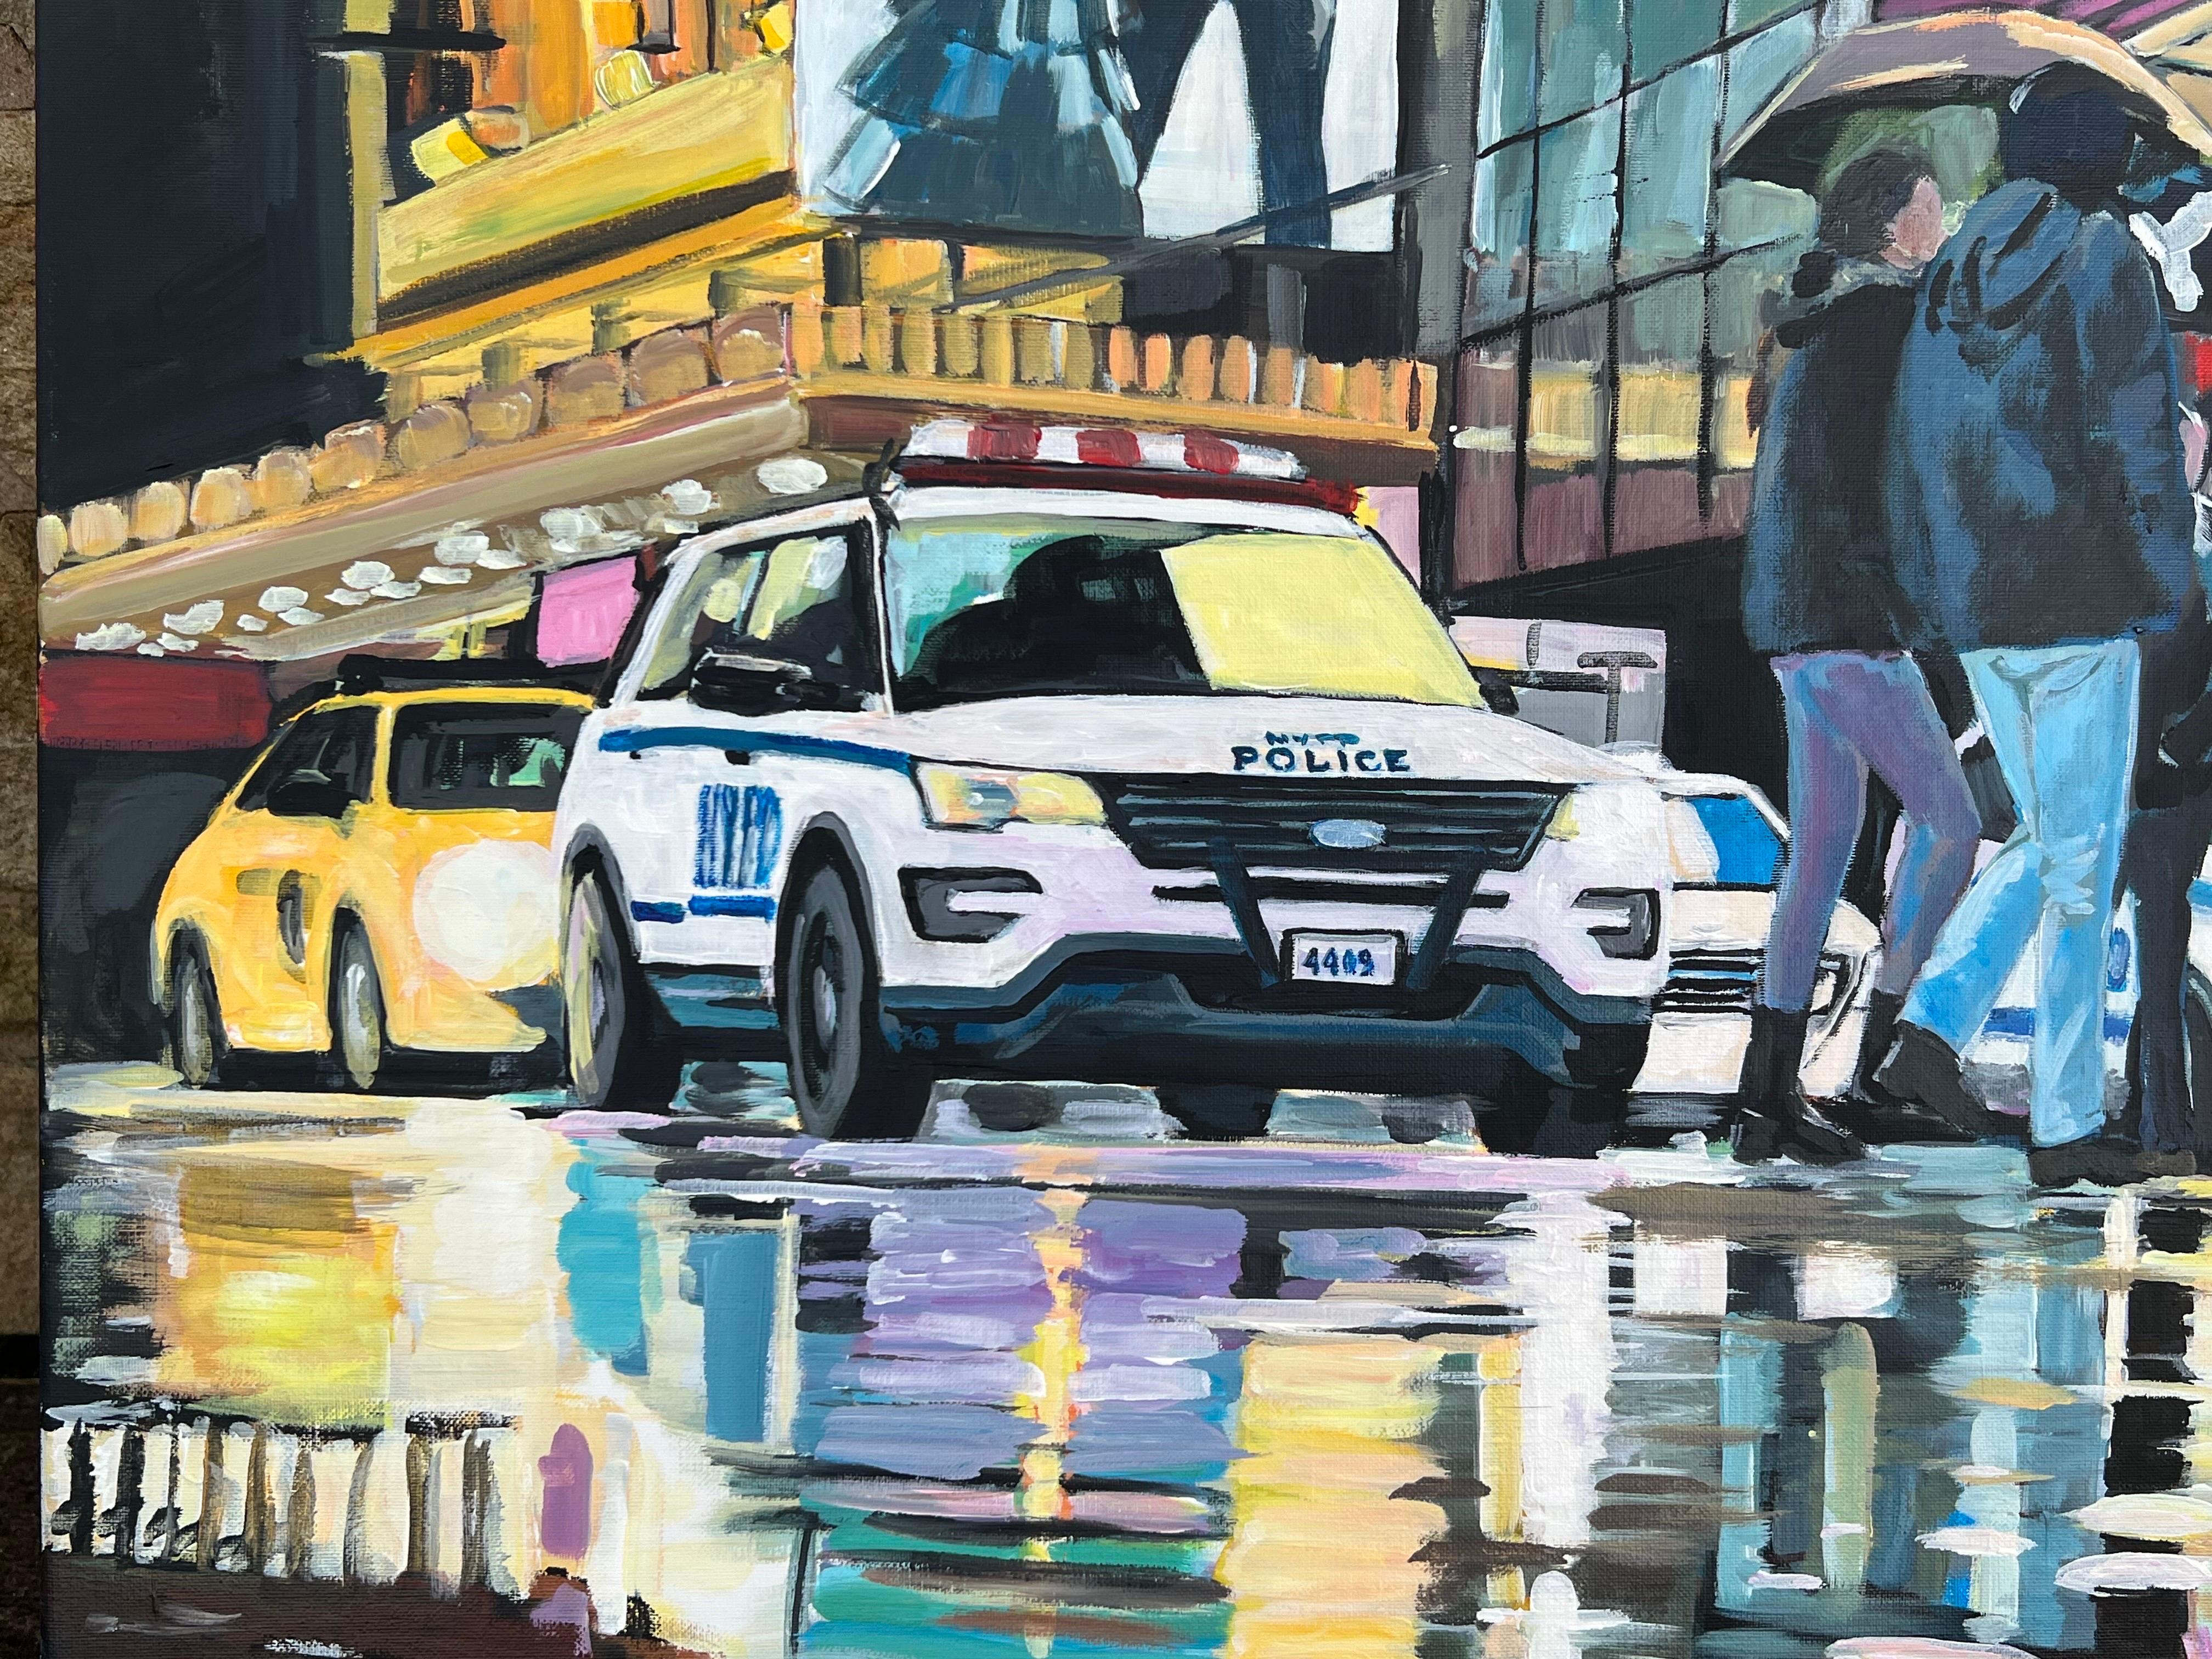 Neon Reflections in the New York City Rain by Contemporary British Urban Artist For Sale 2